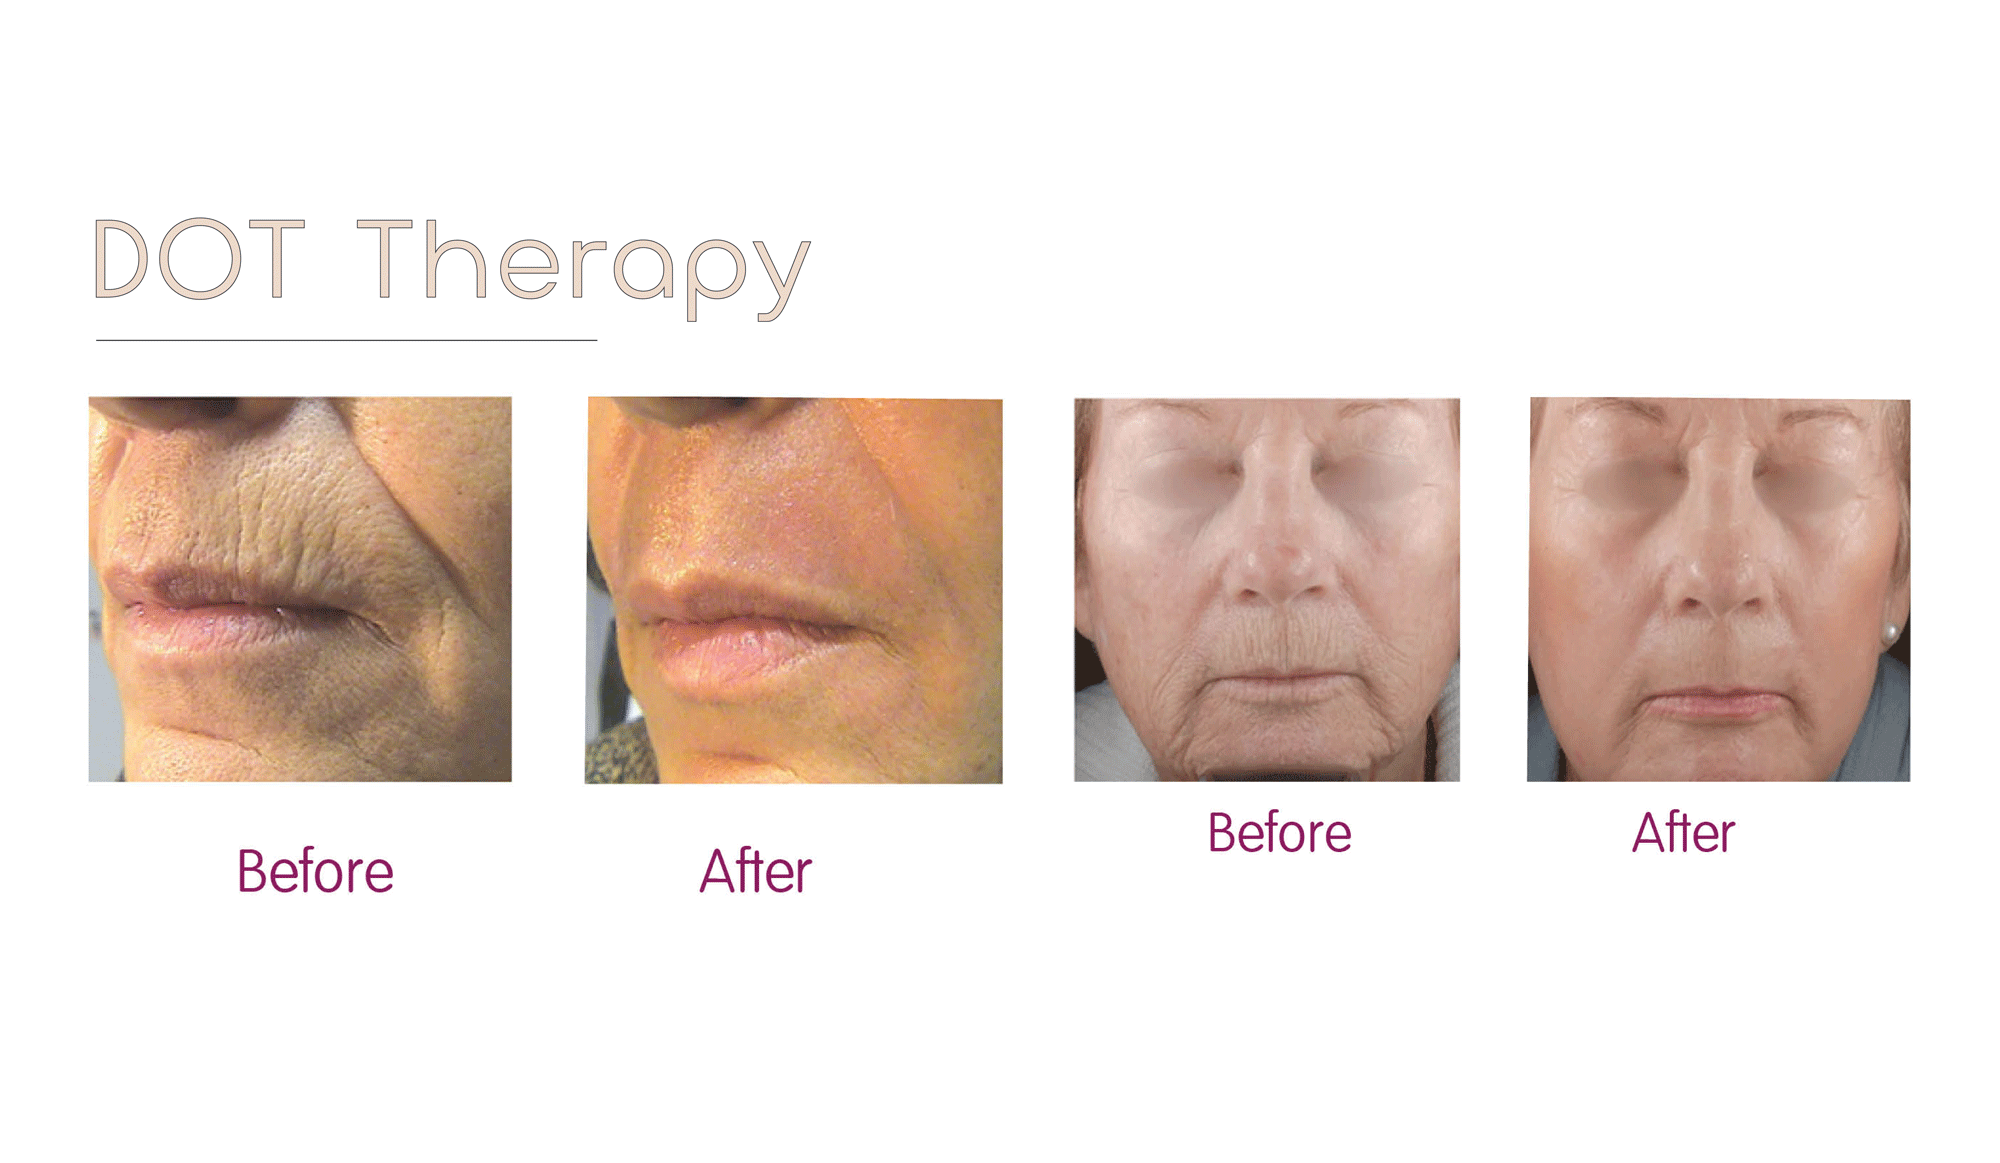 Outstanding results for DOT Therapy Fractional Laser at Dr Hertess Plastic Surgery